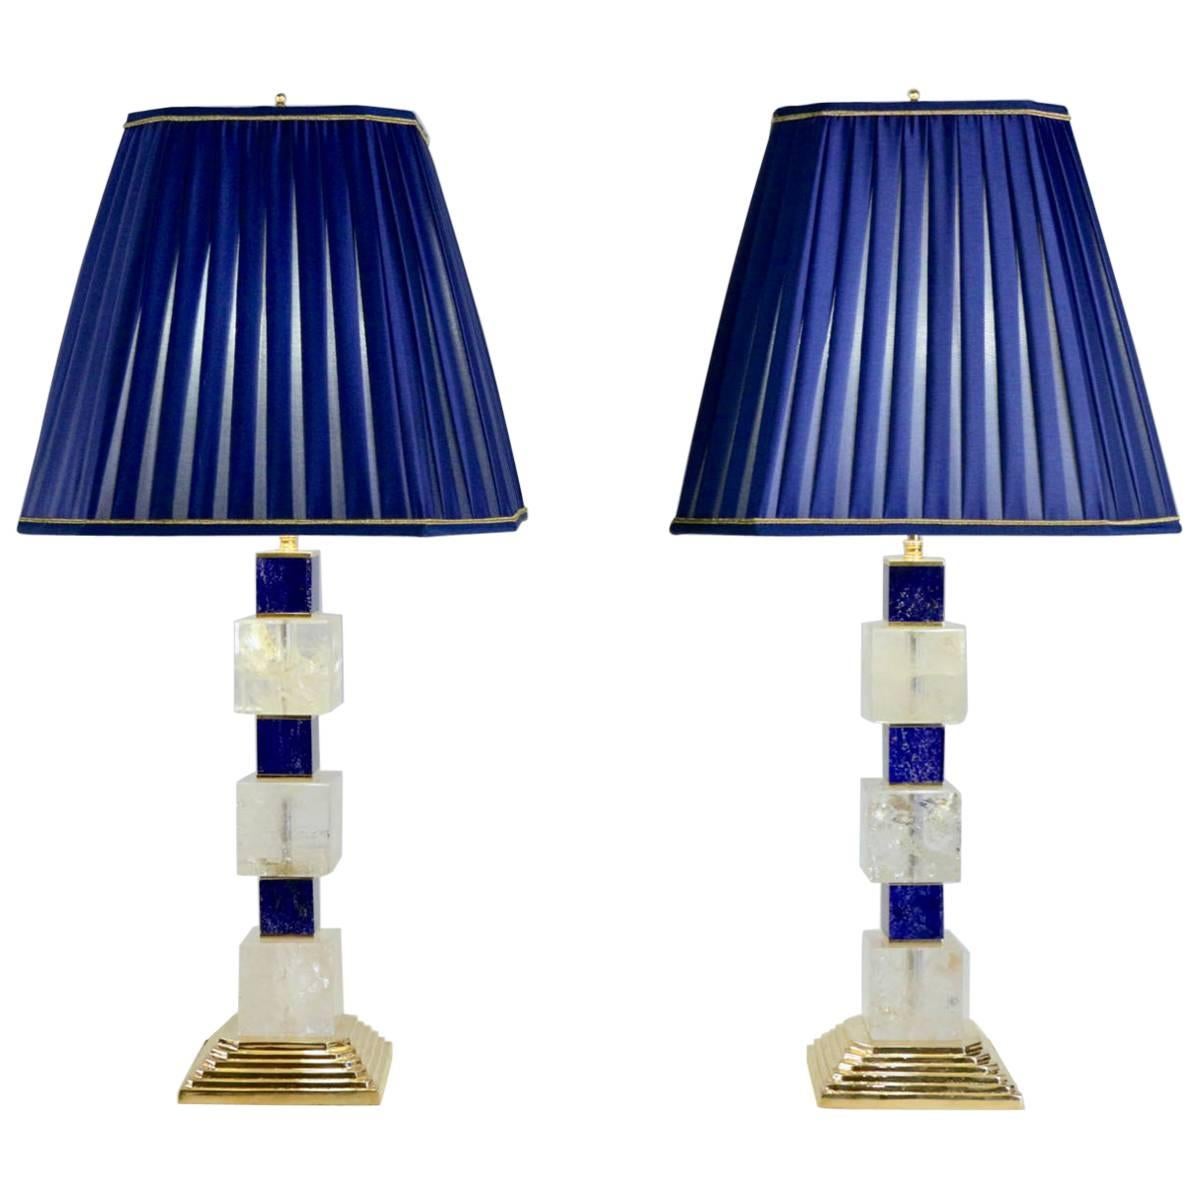 Exclusive Pair of Rock Crystal and Lapis Lazuli Lamps by Alexandre Vossion